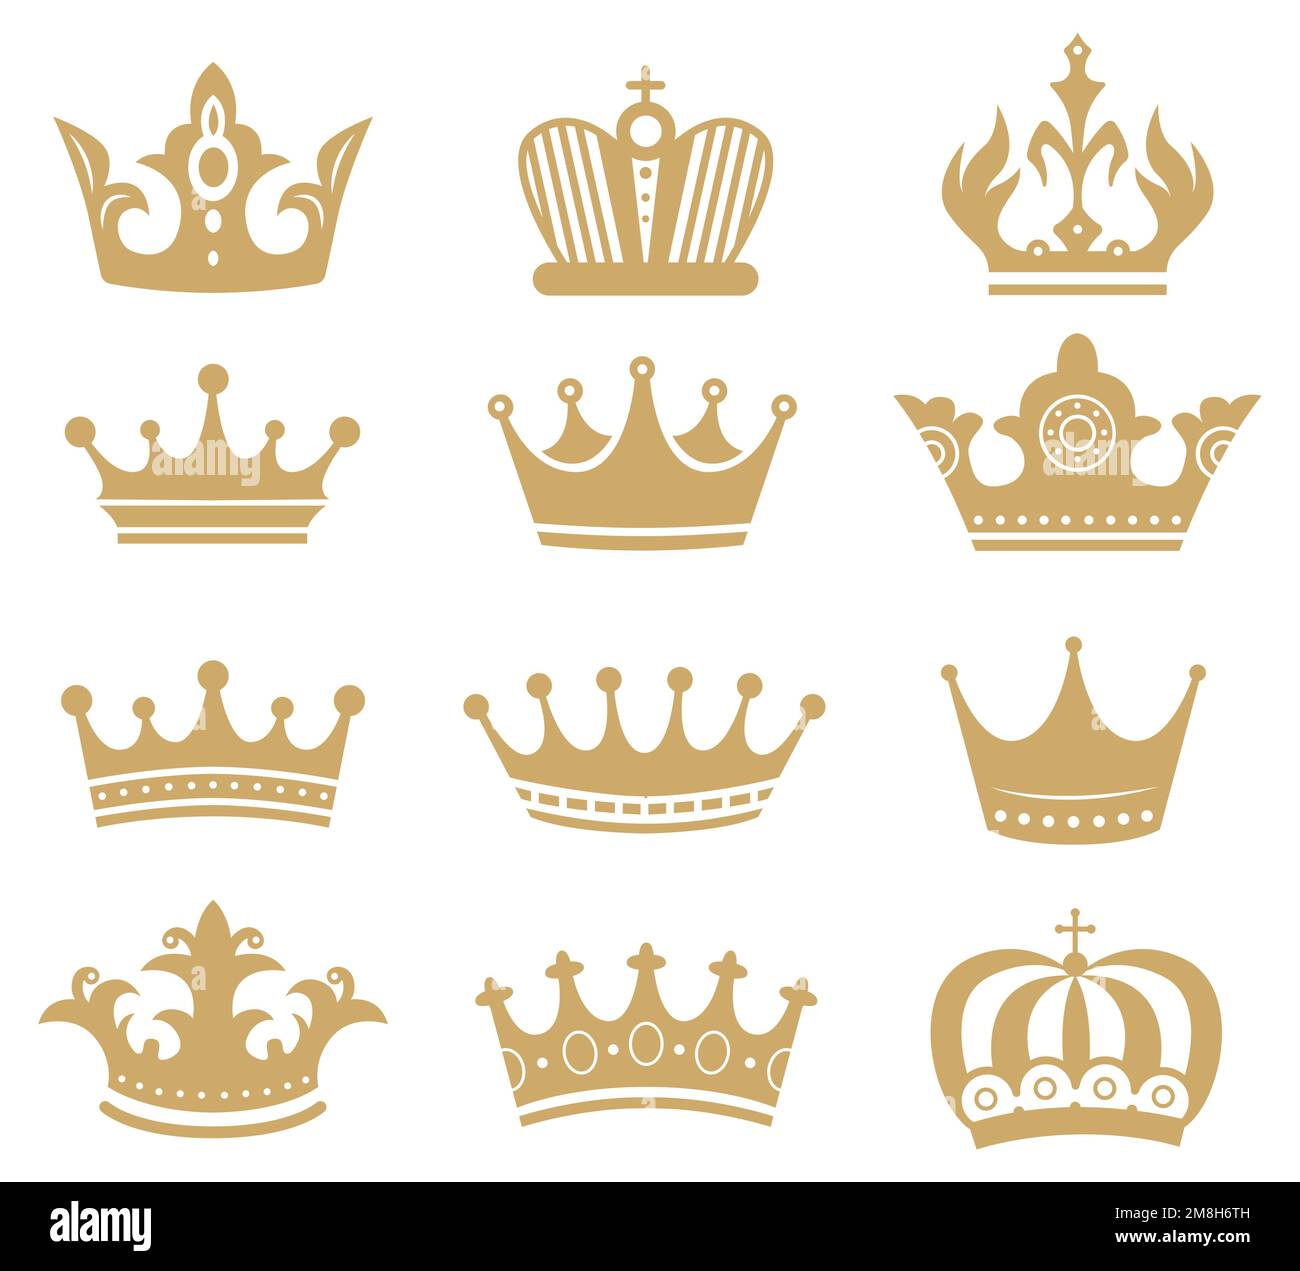 Gold crown silhouette. Royal king and queen elements isolated on white. Monarch jewelry, diadem or tiara for princess Stock Vector